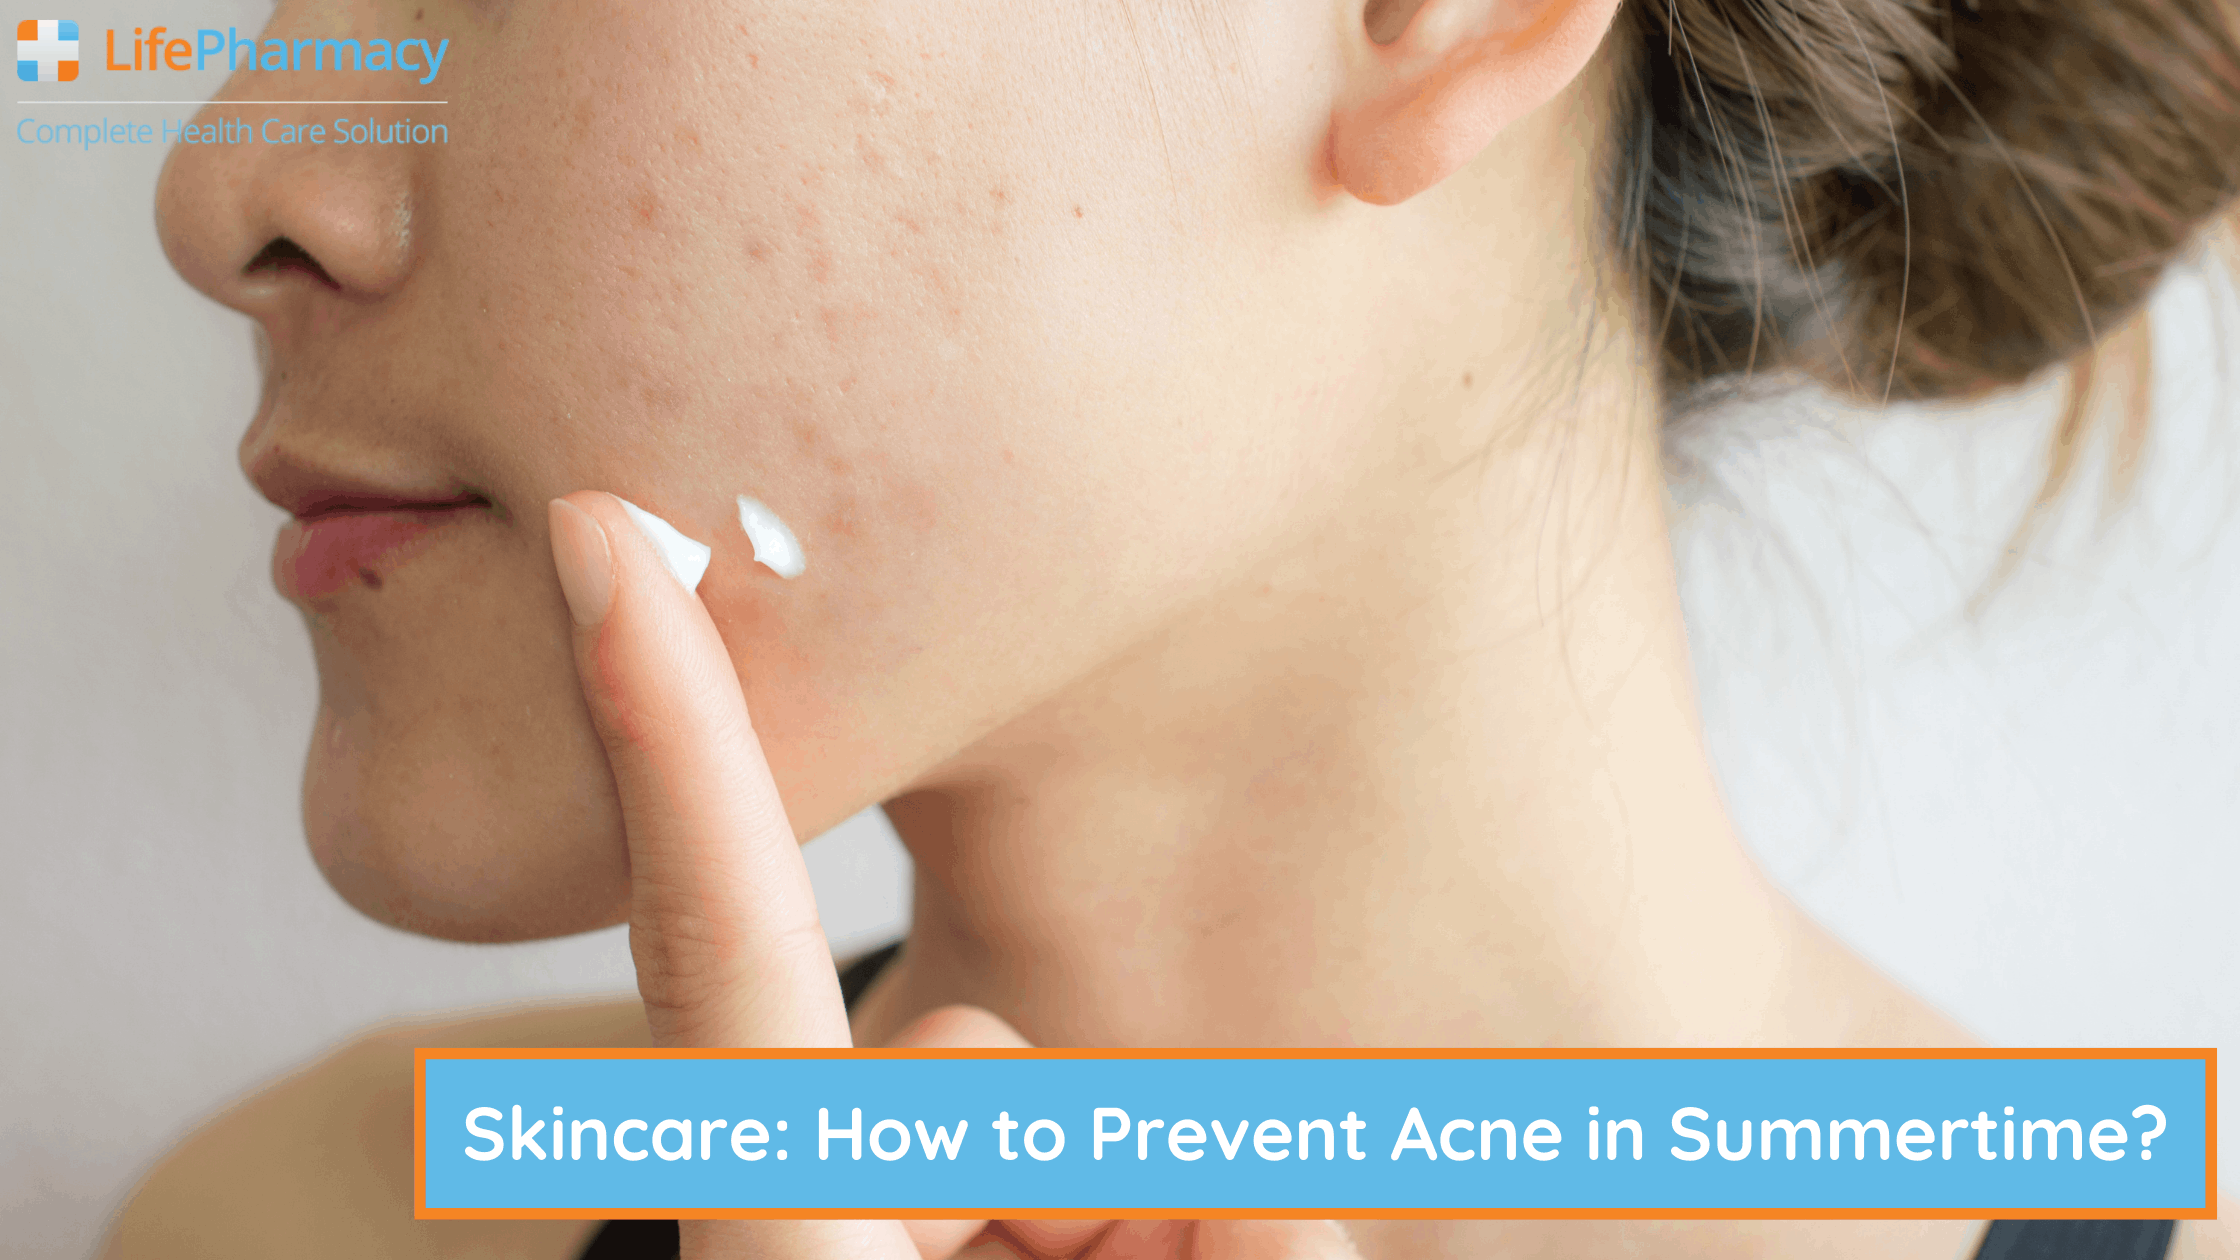 Skincare: How to Prevent Acne in Summertime?